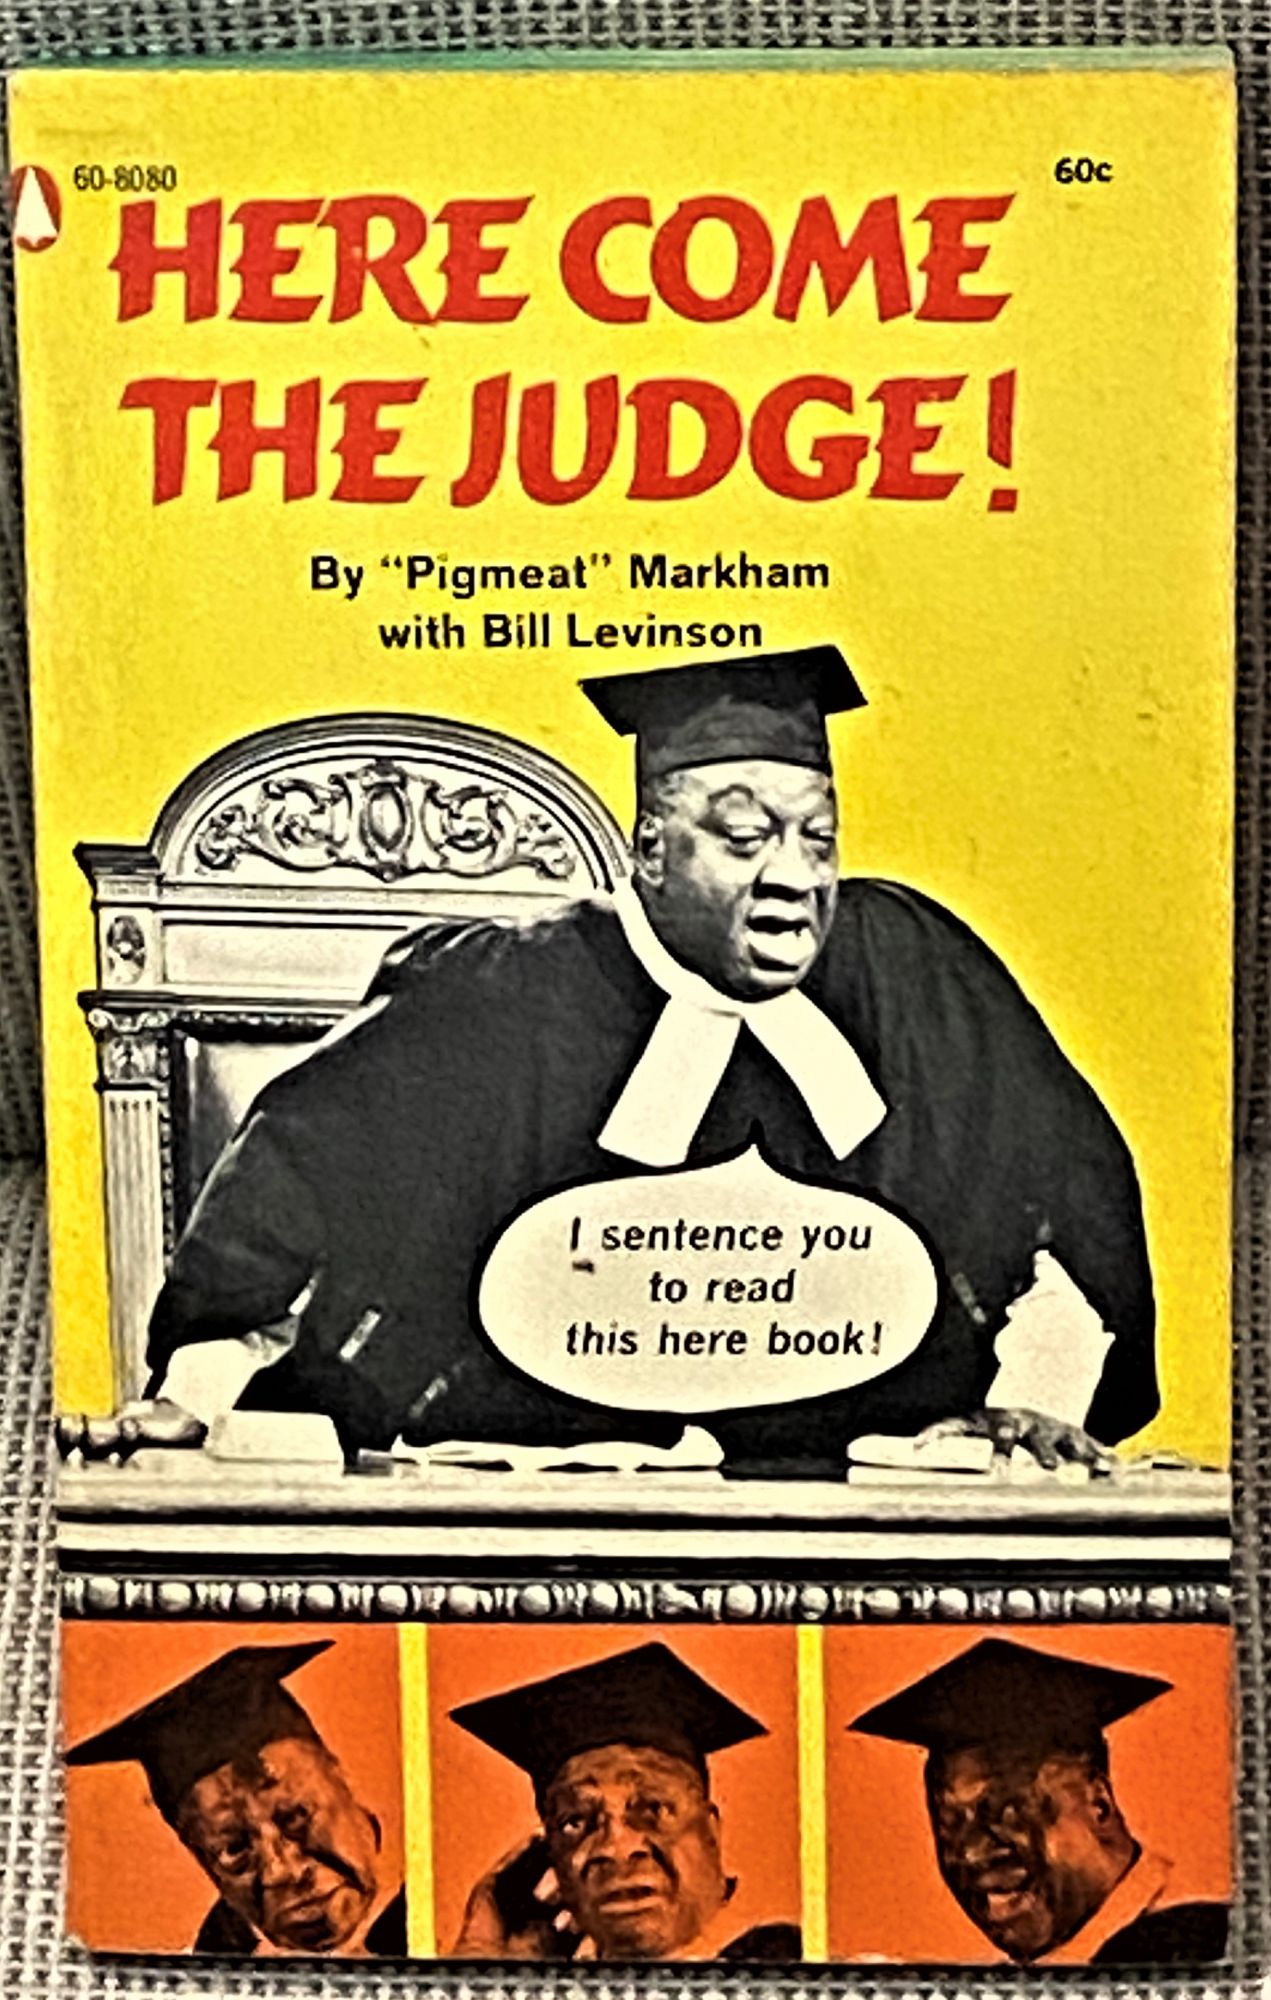 Here Come the Judge! by Dewey Pigmeat Markham, Bill Levinson on My Book  Heaven